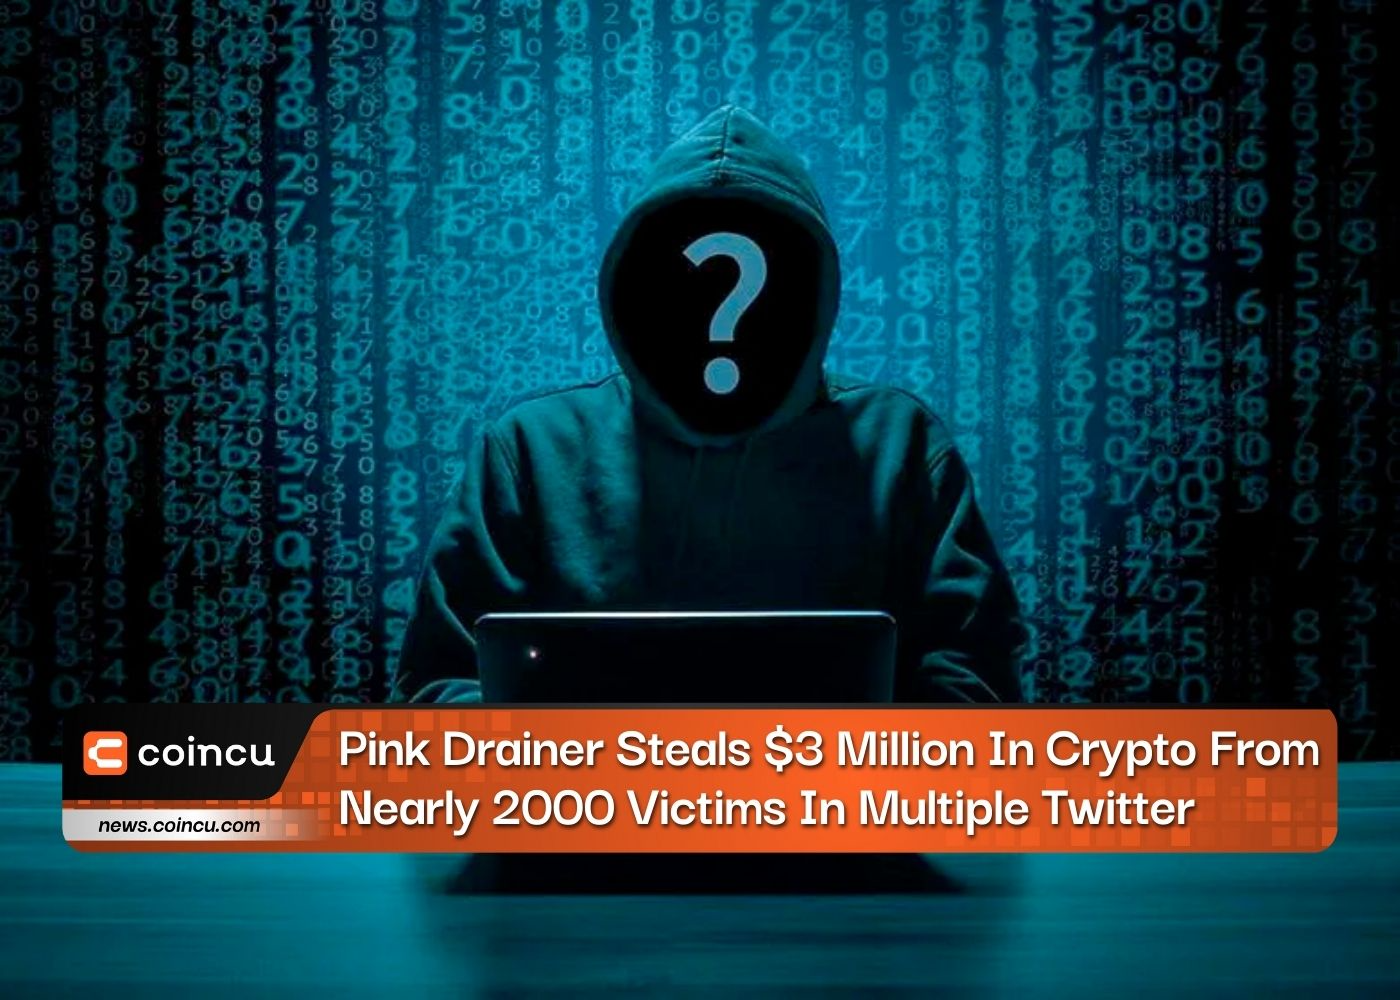 Pink Drainer Steals $3 Million In Crypto From Nearly 2000 Victims In Multiple Twitter